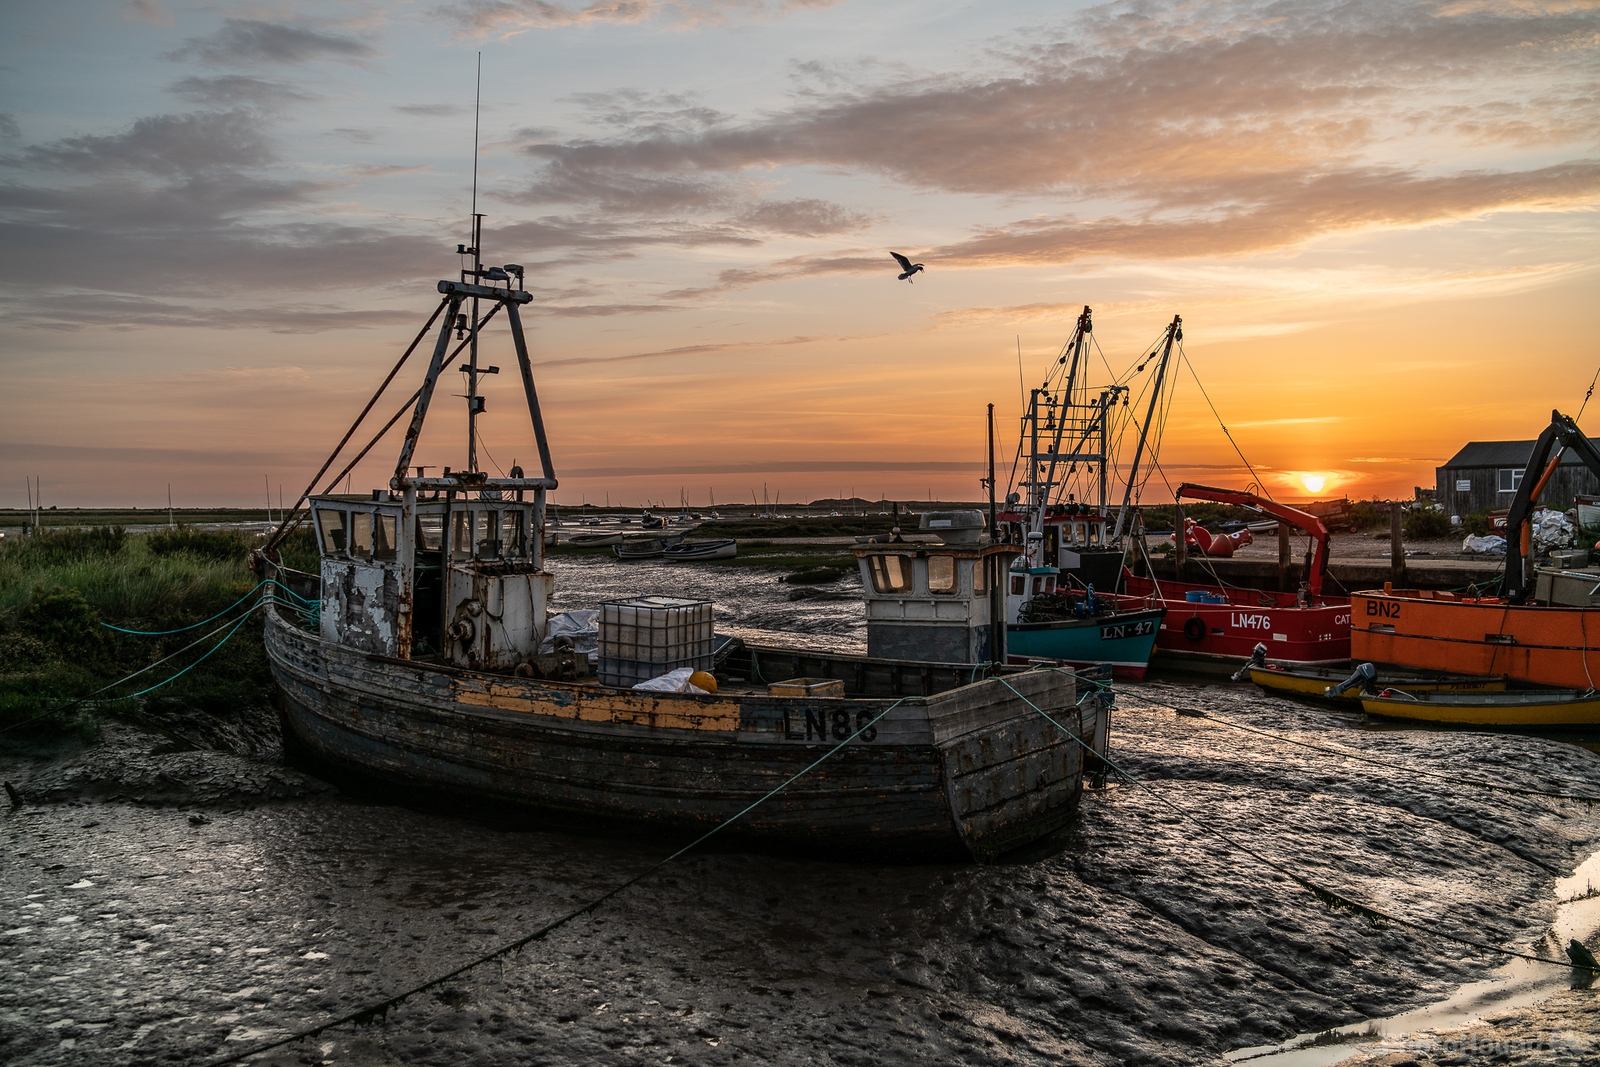 Image of Brancaster Staithe by James Billings.